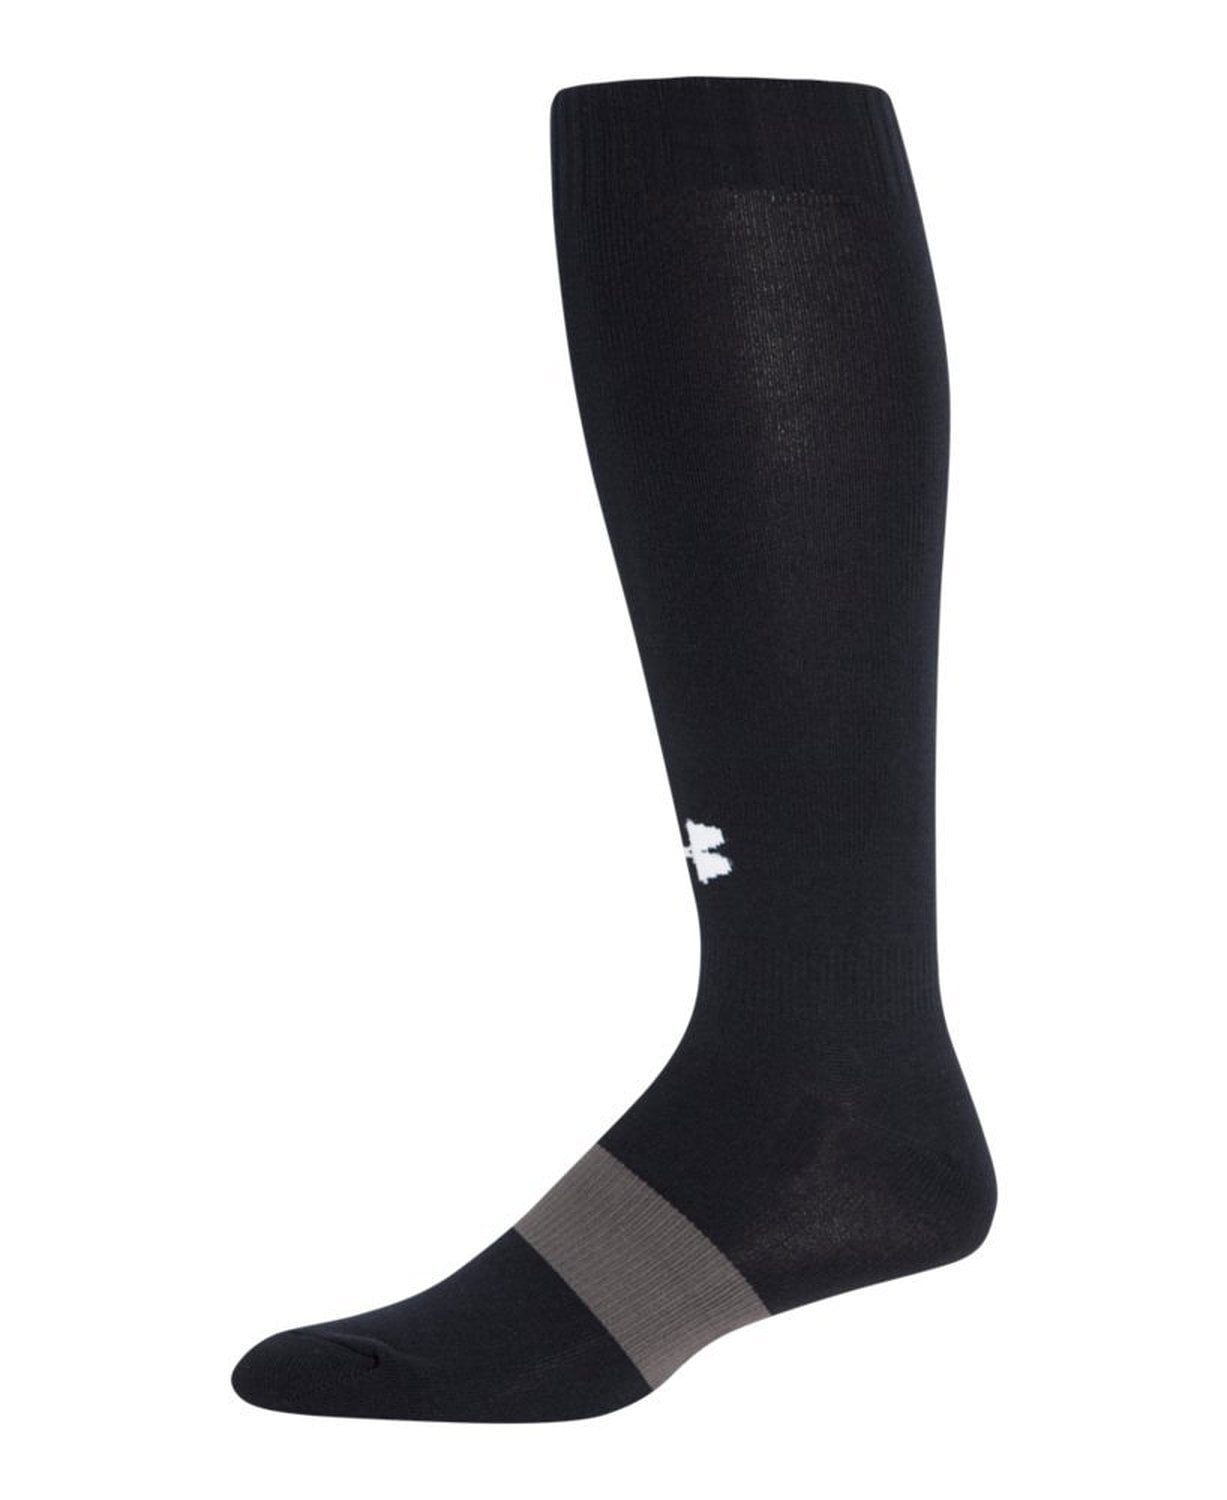 1 Pair Under Armour Mens Ignite Soccer Over-the-Calf Socks